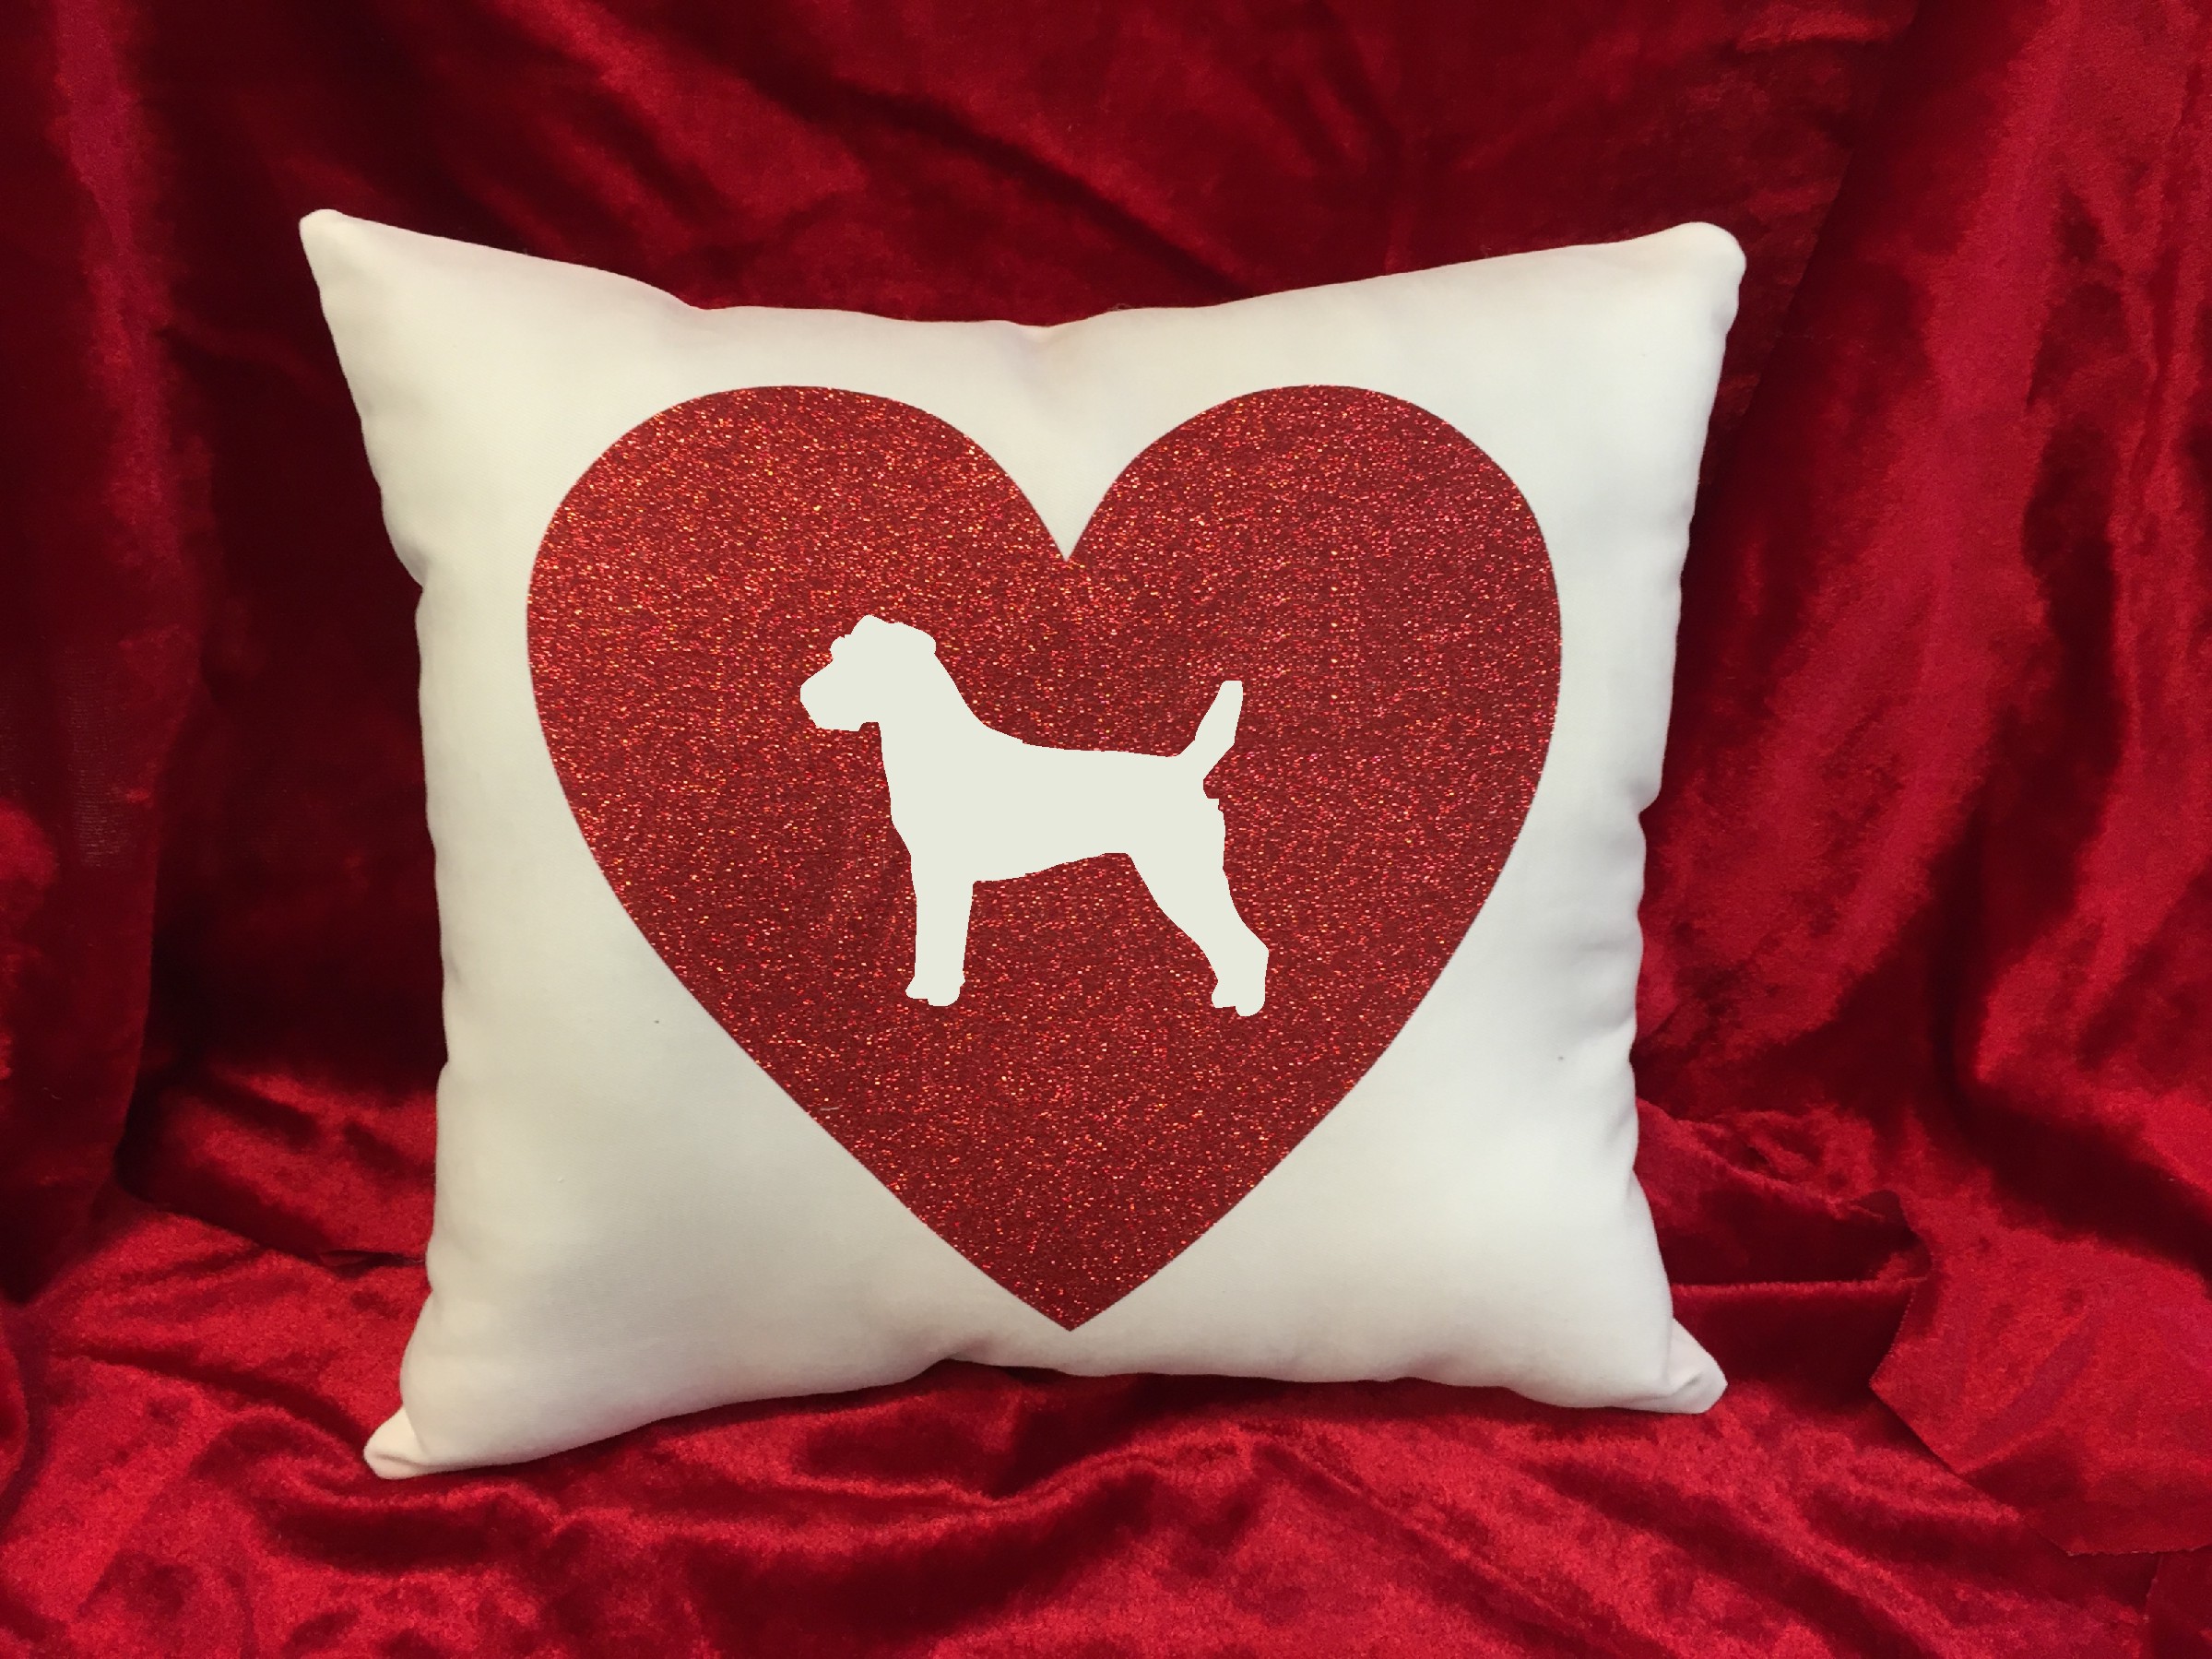 Dogs - Throw Pillow - Parson Russell Terrier